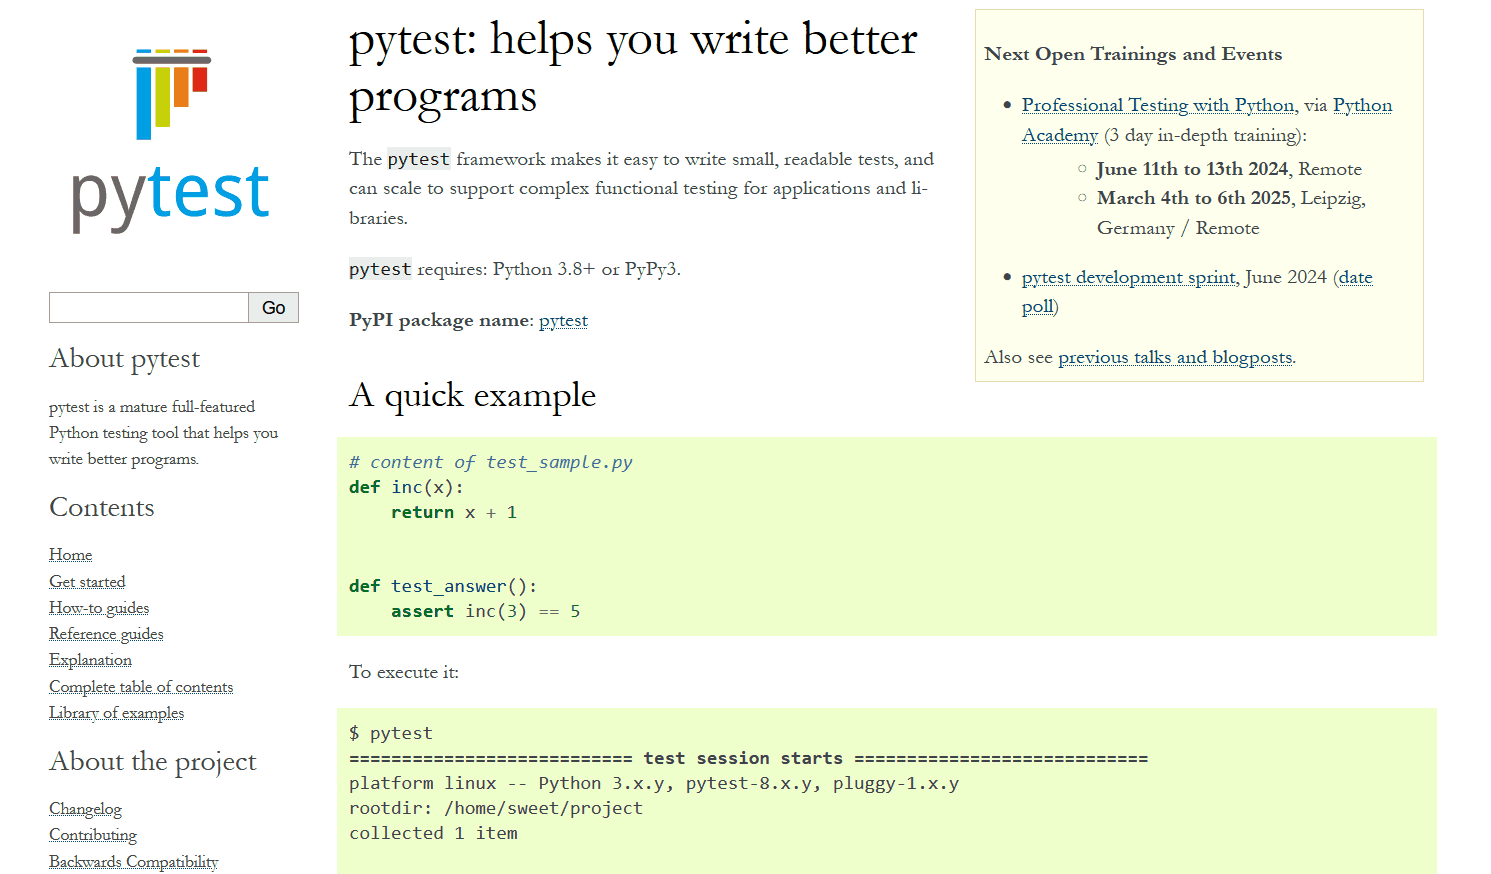 pytest is considered one of the best Python testing frameworks